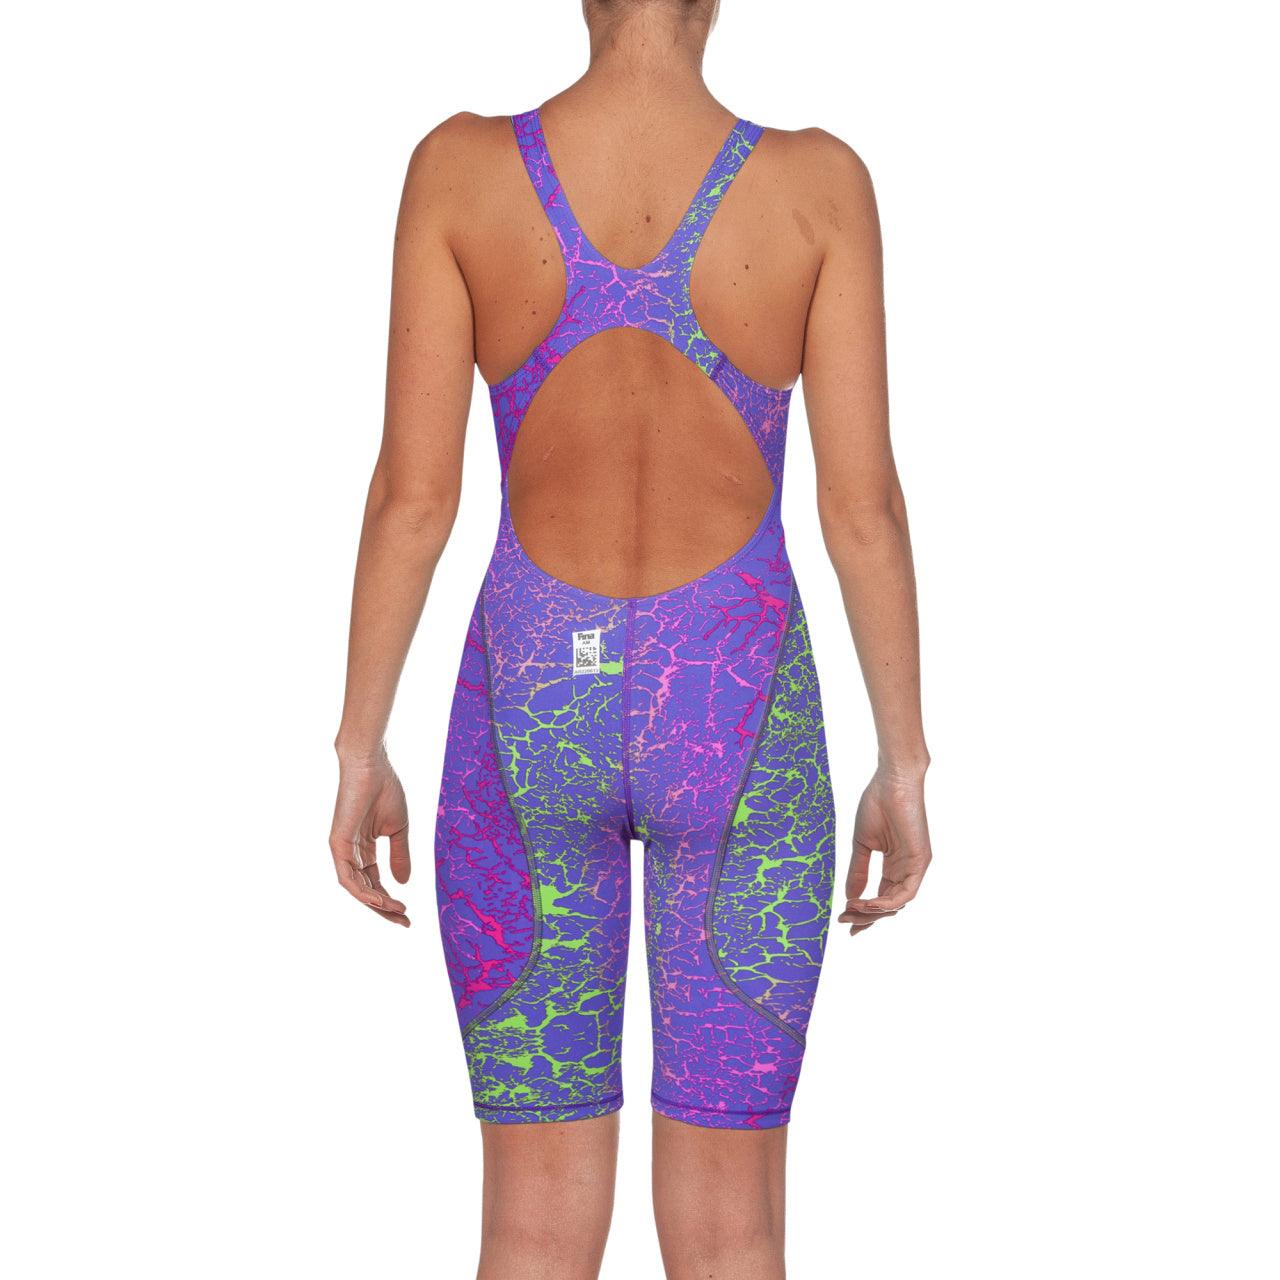 Women's Powerskin ST 2.0 Storm Sonic Limited edition - {{ collection.title }} - TIT